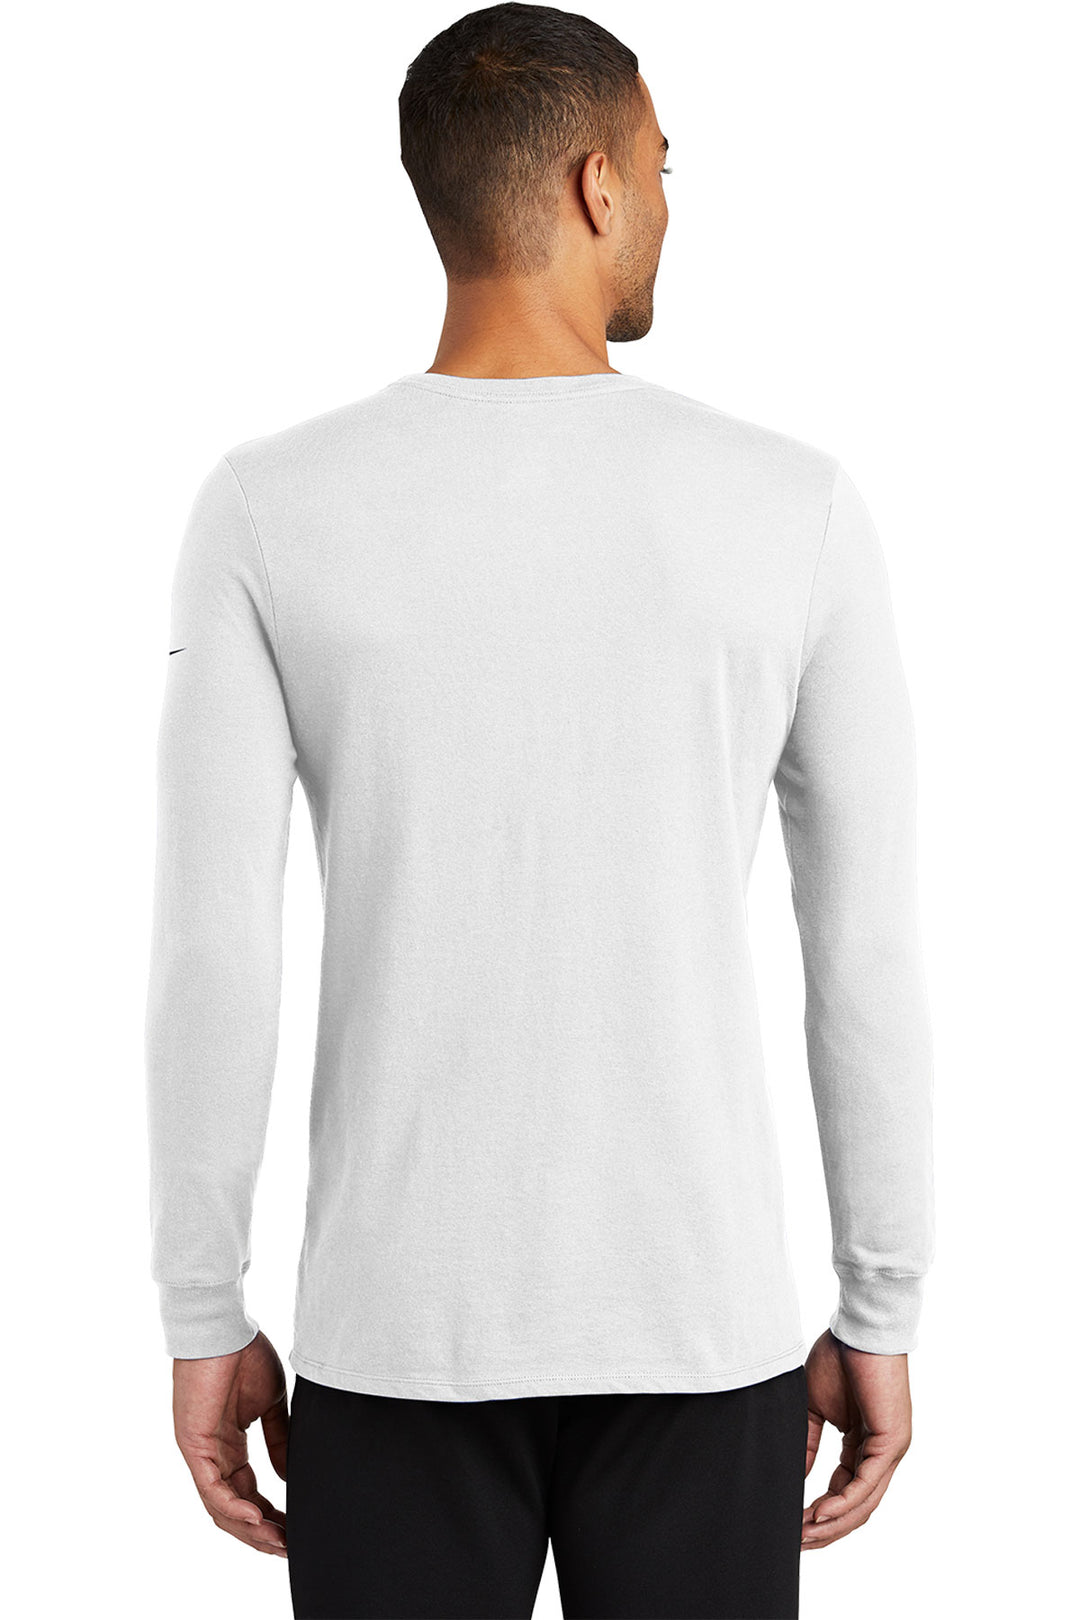 Dri-FIT Cotton/Poly Long Sleeve Tee